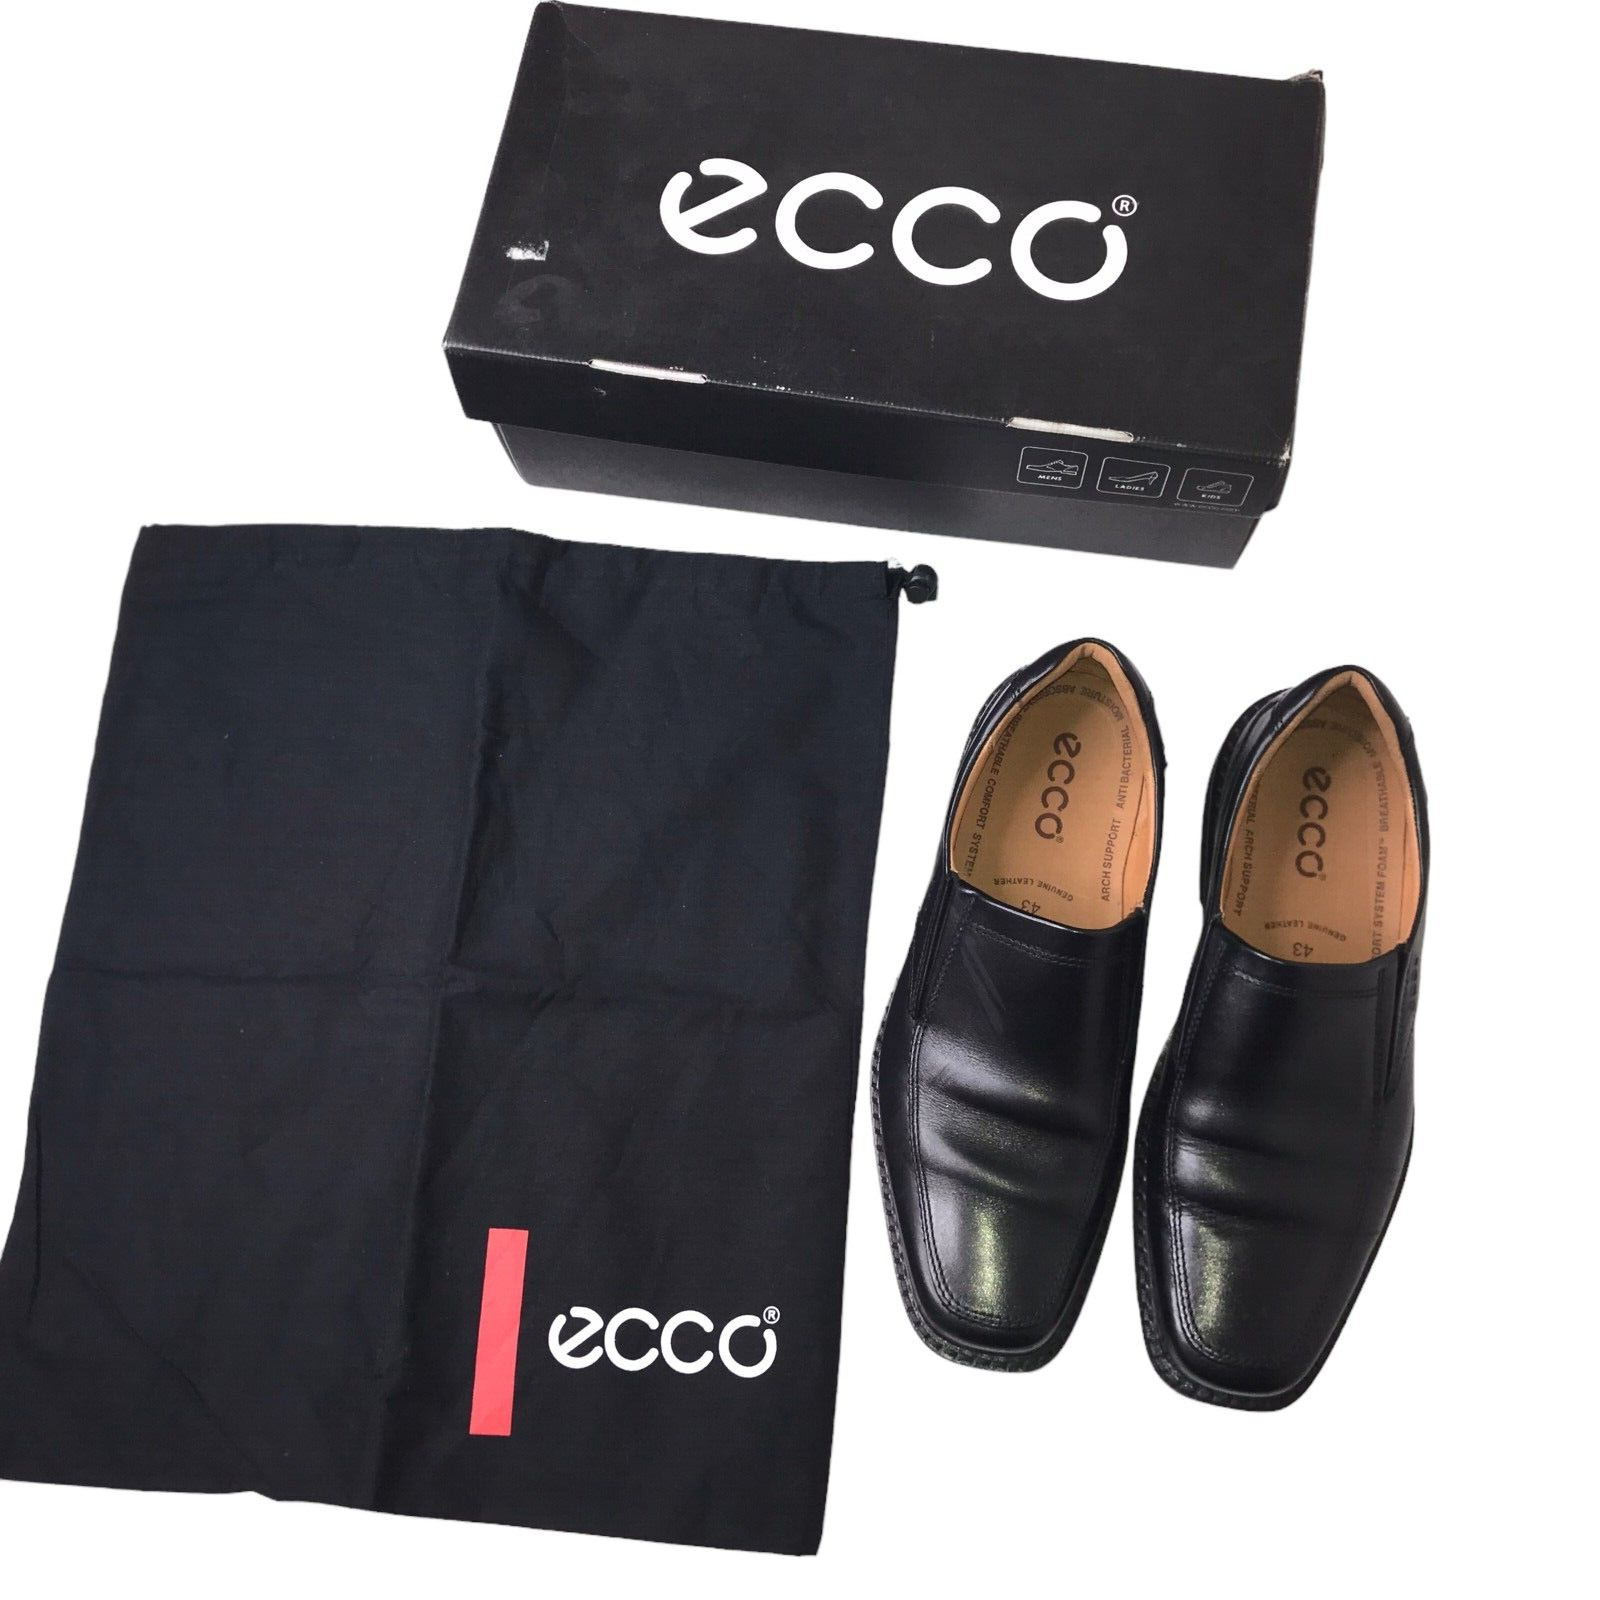 New in Box ECCO Men's Loafer Shoes, Black, Leather Size Men's 43, (US 9-9.5)